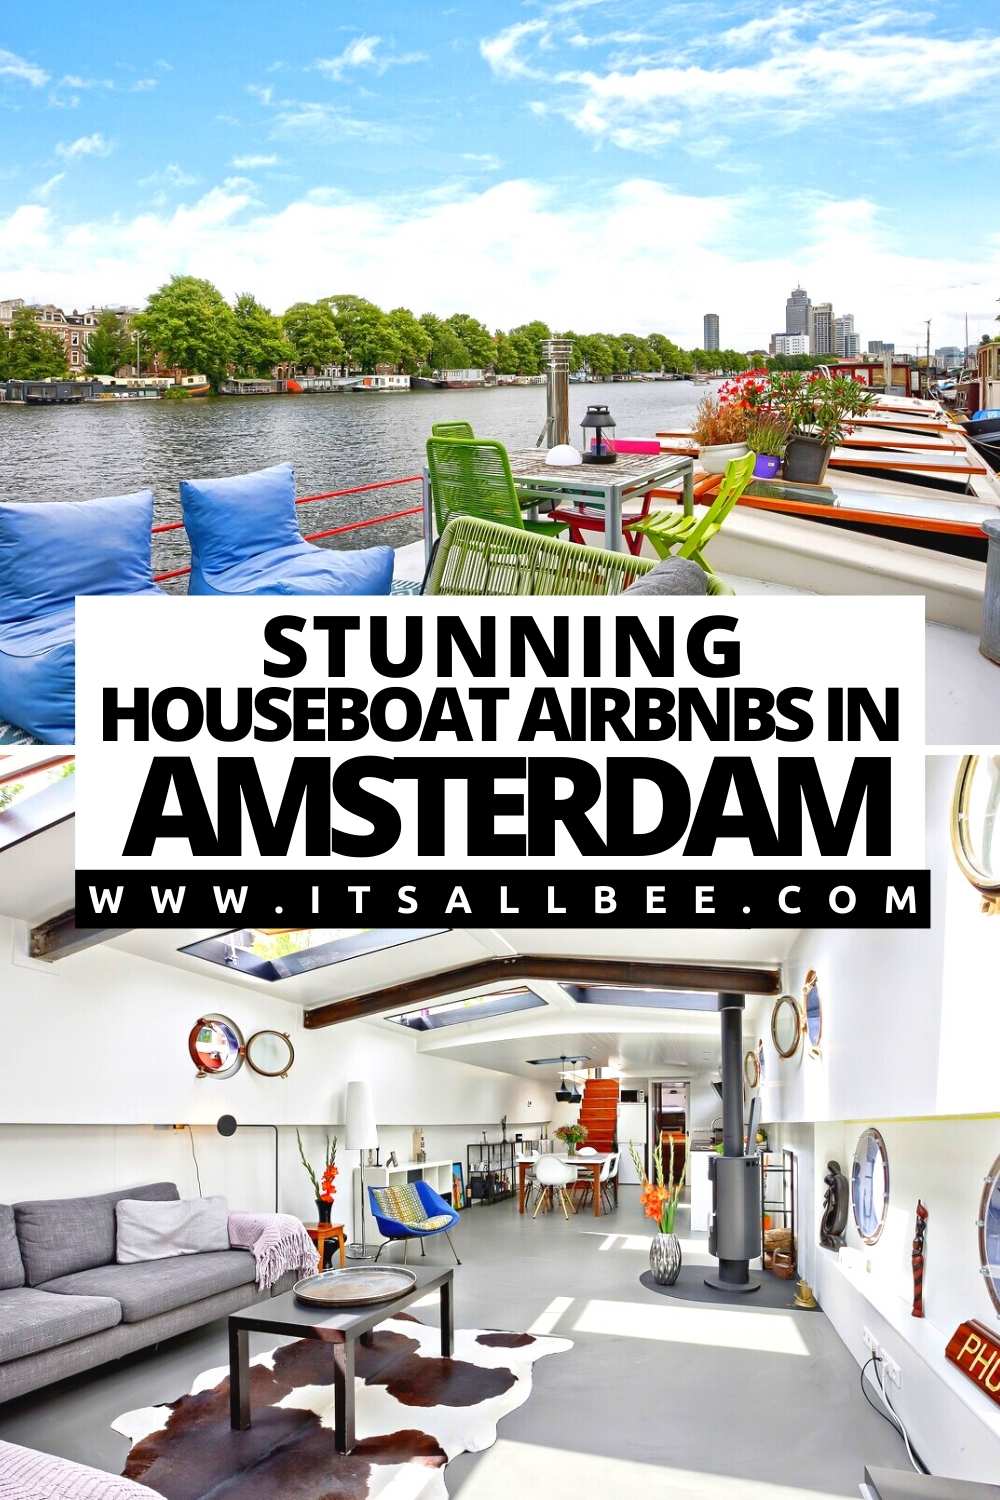 Best Airbnb In Amsterdam| Romantic Houseboat Amsterdam Airbnb | Houseboat Rental Amsterdam | Airbnb Amsterdam Houseboat | Luxury Houseboat Rentals Amsterdam | Cheap Houseboat Amsterdam |